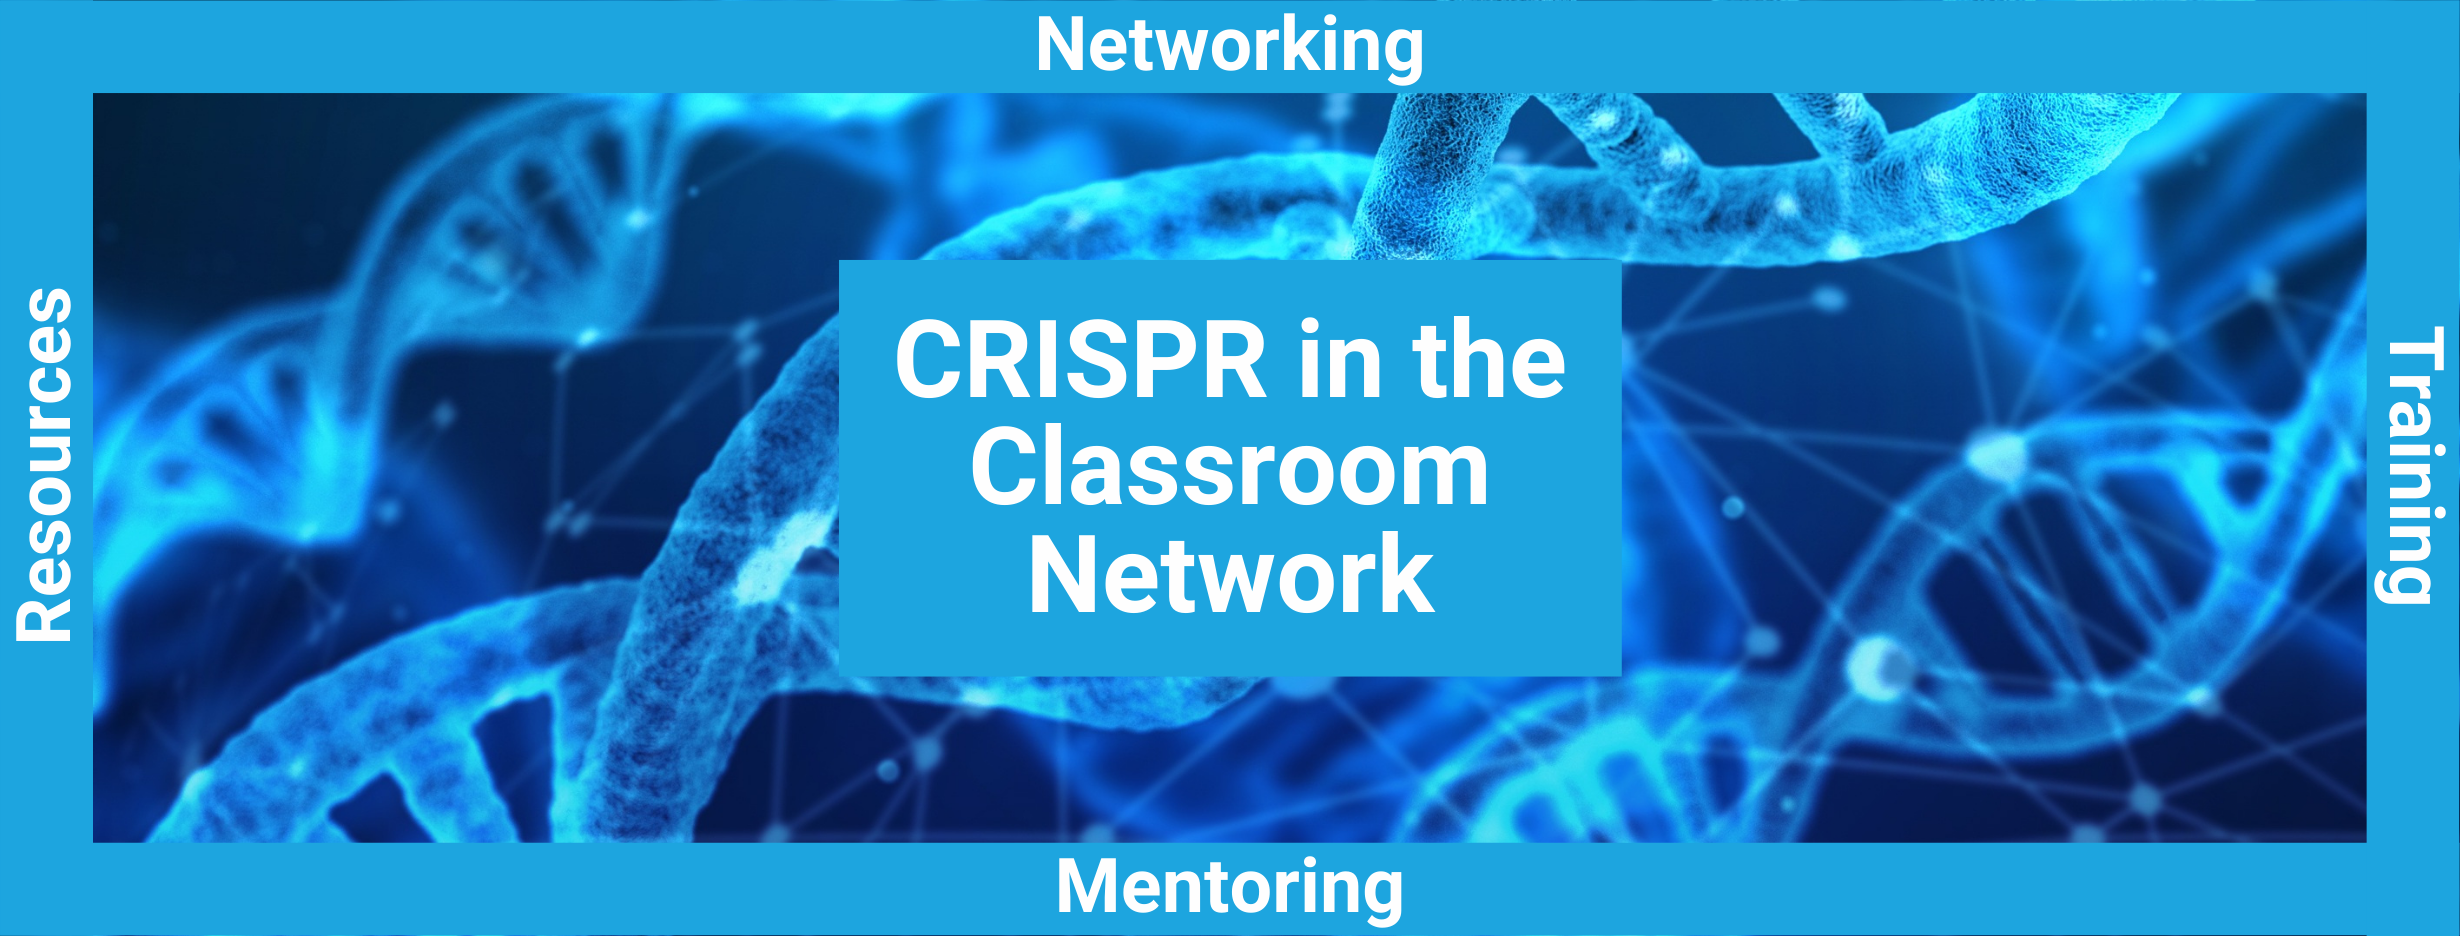 CRISPR in the Classroom Network: Networking, Mentoring, Training, Resources